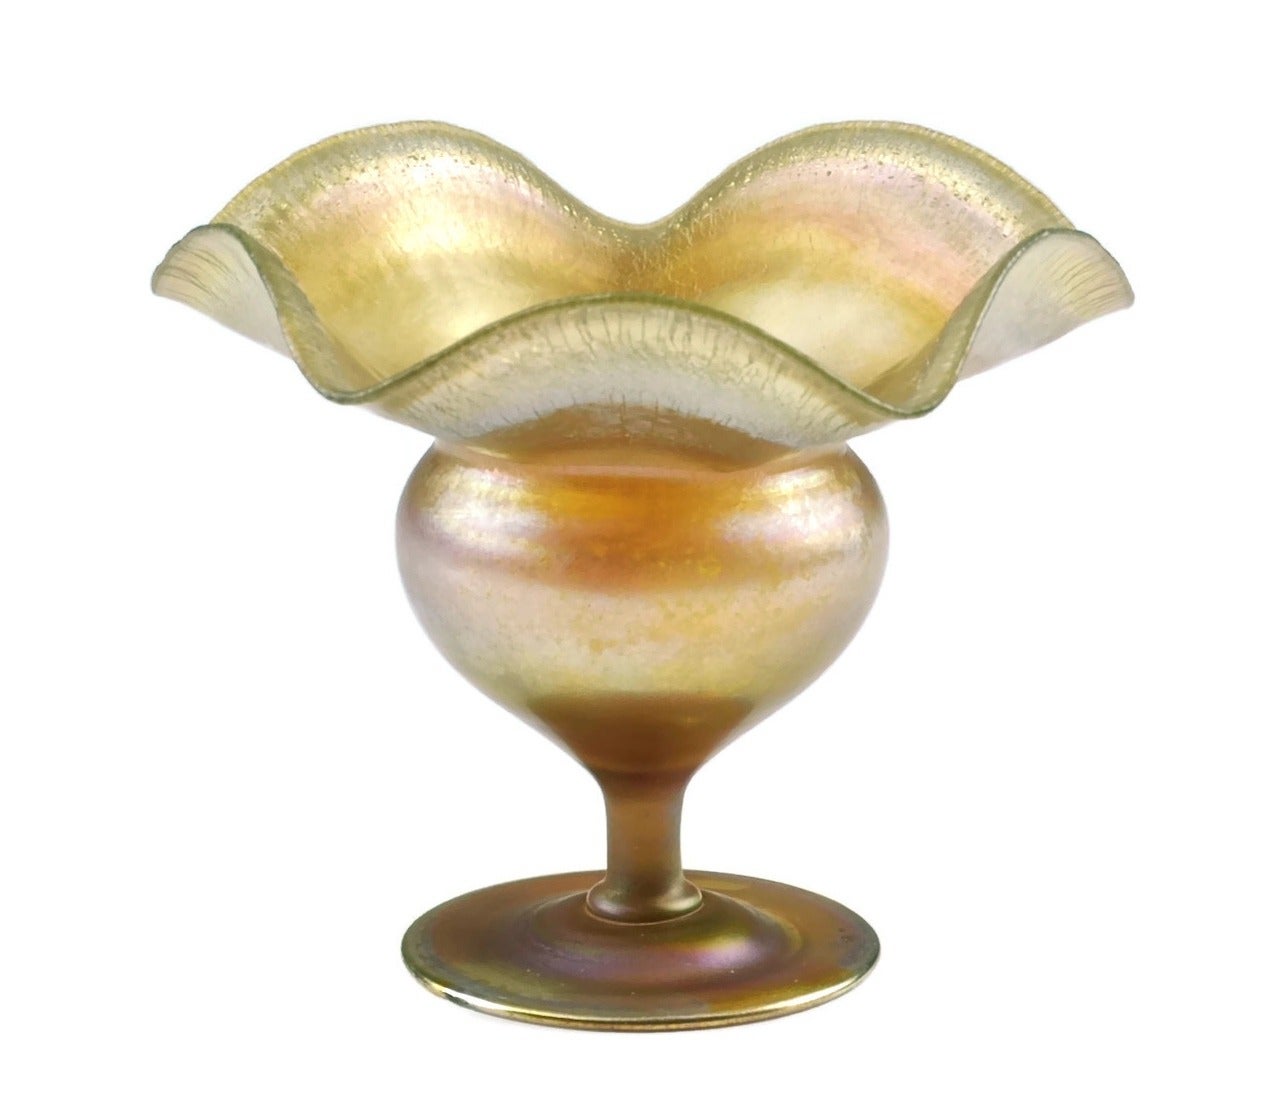 L.C. Tiffany Gold Favrile vase. This striking iridescent glass vase was made by the factory of renowned artist and designer Louis Comfort Tiffany. A trained painter, L.C. Tiffany was the son of Tiffany & Company co-founder Charles Lewis Tiffany and